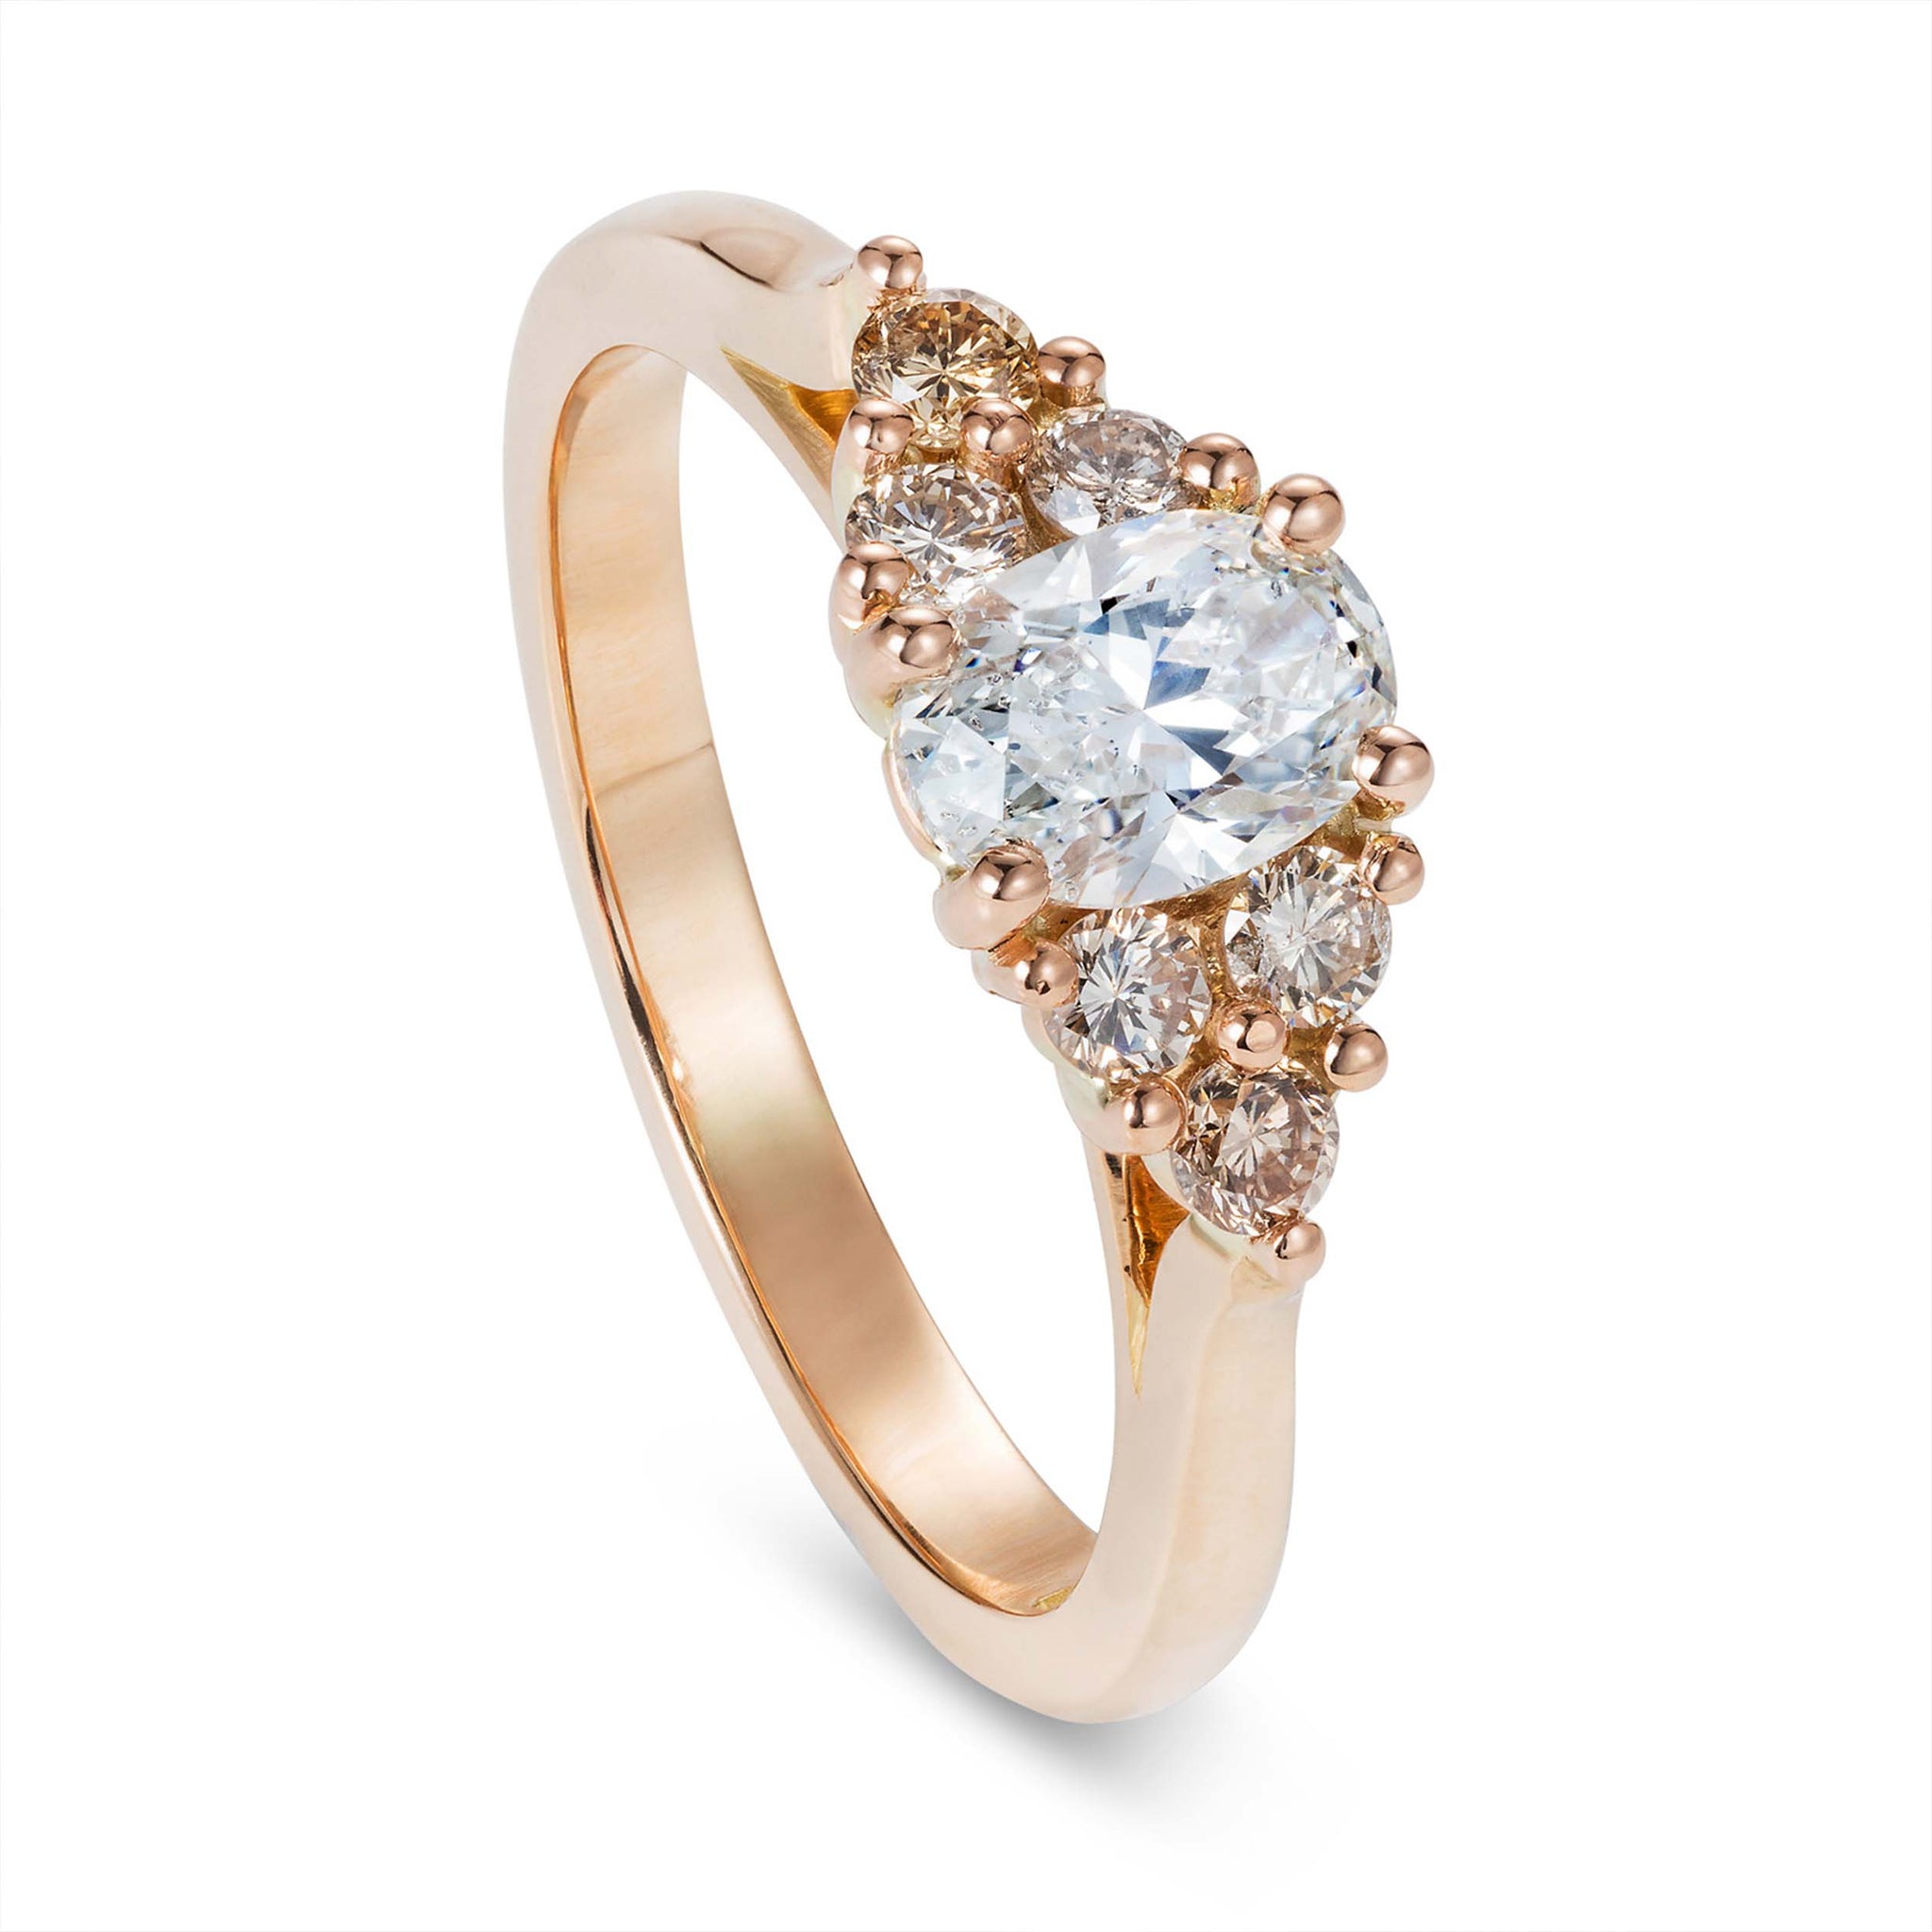 Ombré Champagne Engagement Ring by Yasmin Everley